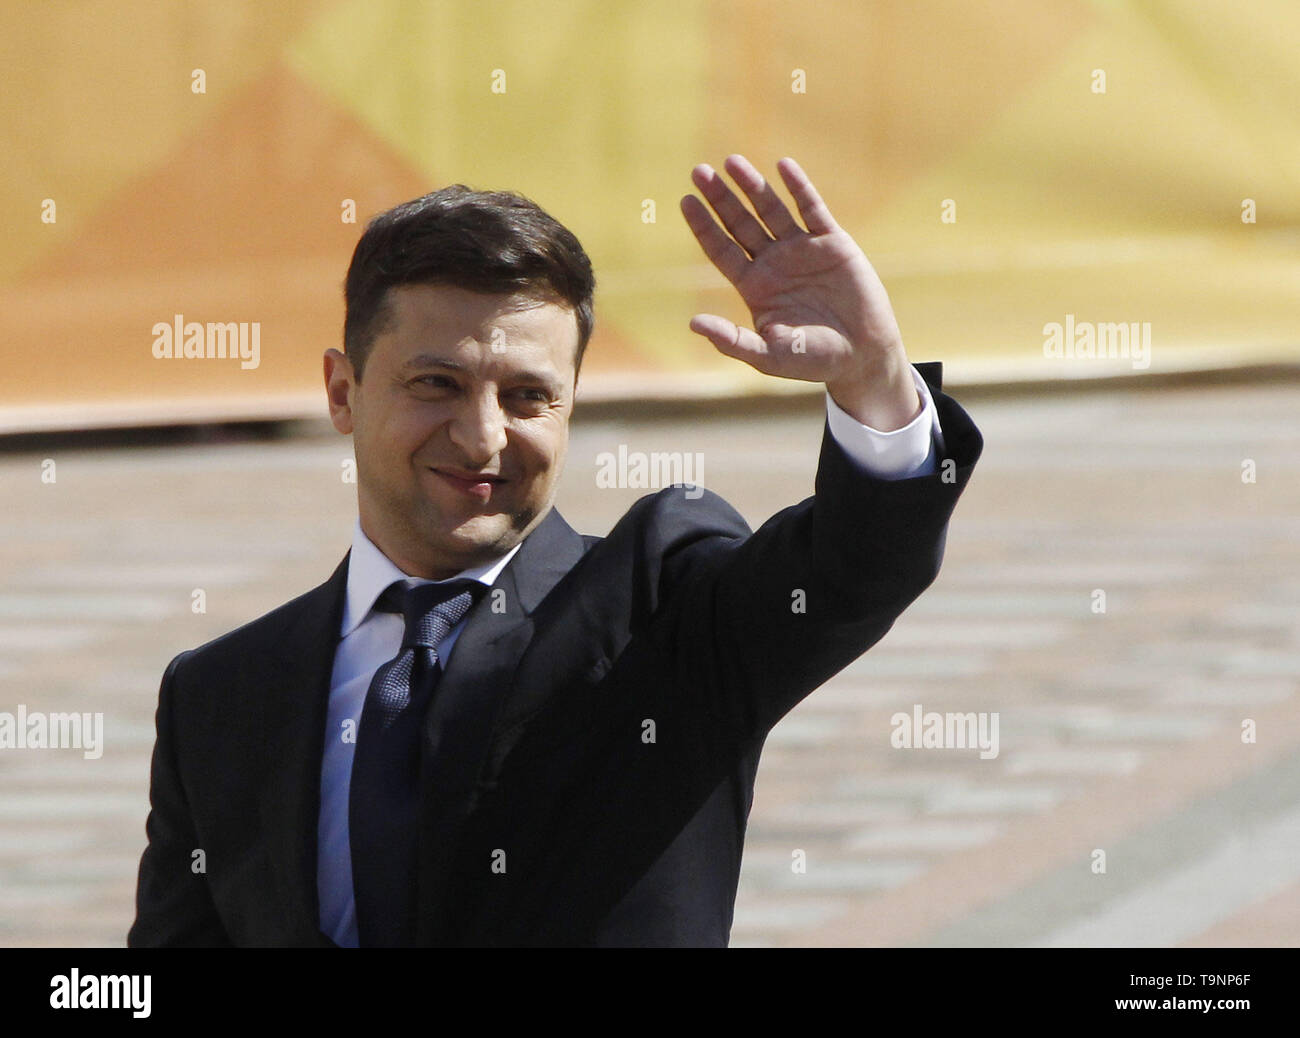 Kiev, Ukraine. 20th May, 2019. Ukrainian newly elected President VOLODYMYR ZELENSKIY arrives for his inauguration ceremony at the Parliament building in Kiev, Ukraine, on 20 May 2019. Zelenskiy won the Presidential election with 73, 22 percent of the voters on April 21. Credit: Serg Glovny/ZUMA Wire/Alamy Live News Stock Photo